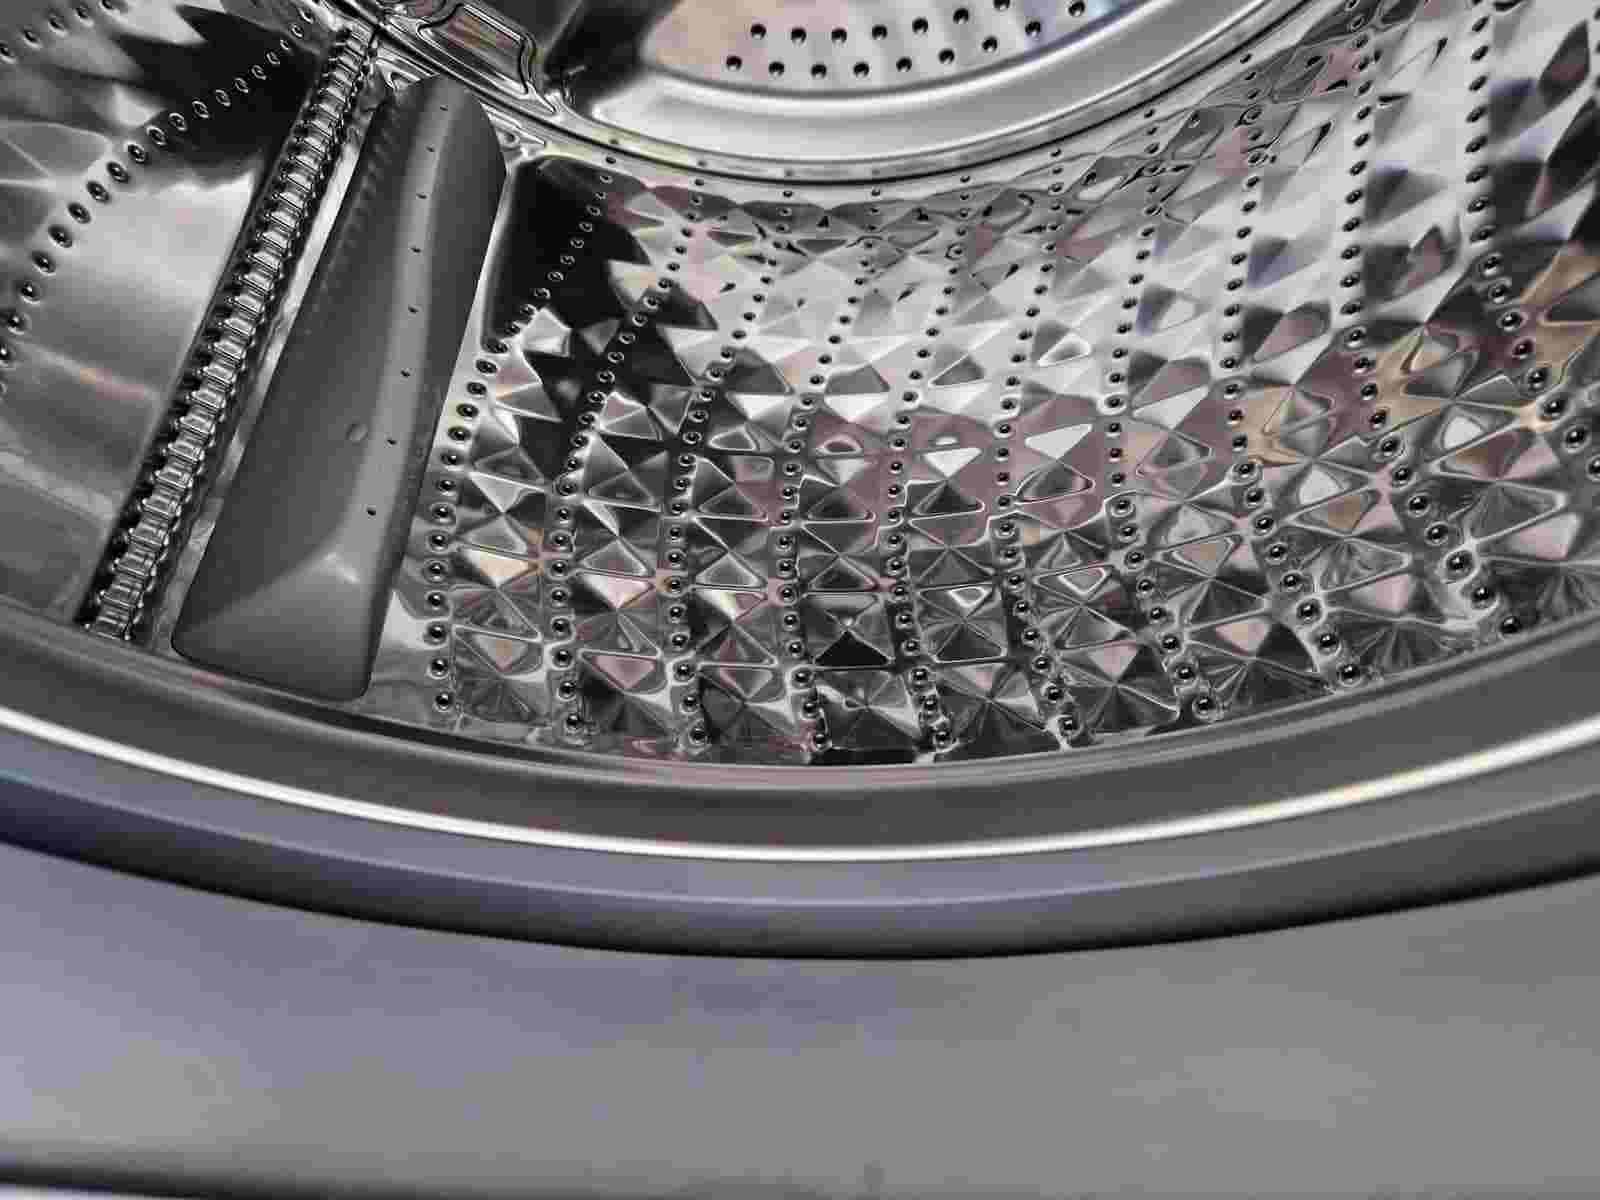 THIS IS THE BEST WAY TO CLEAN YOUR WASHING MACHINE